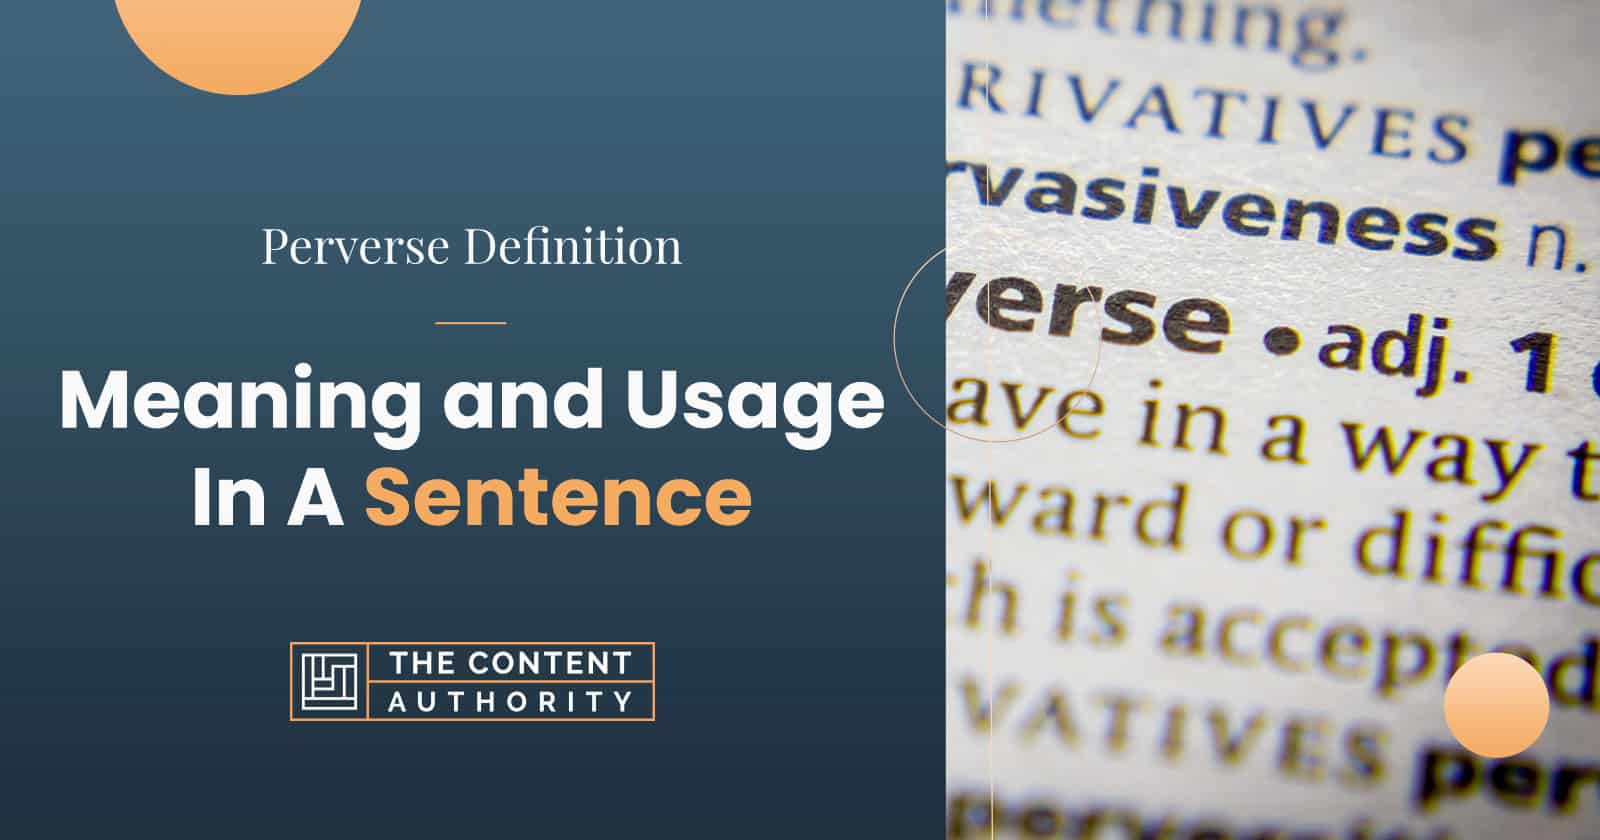 Perverse Definition &#8211; Meaning and Usage In A Sentence